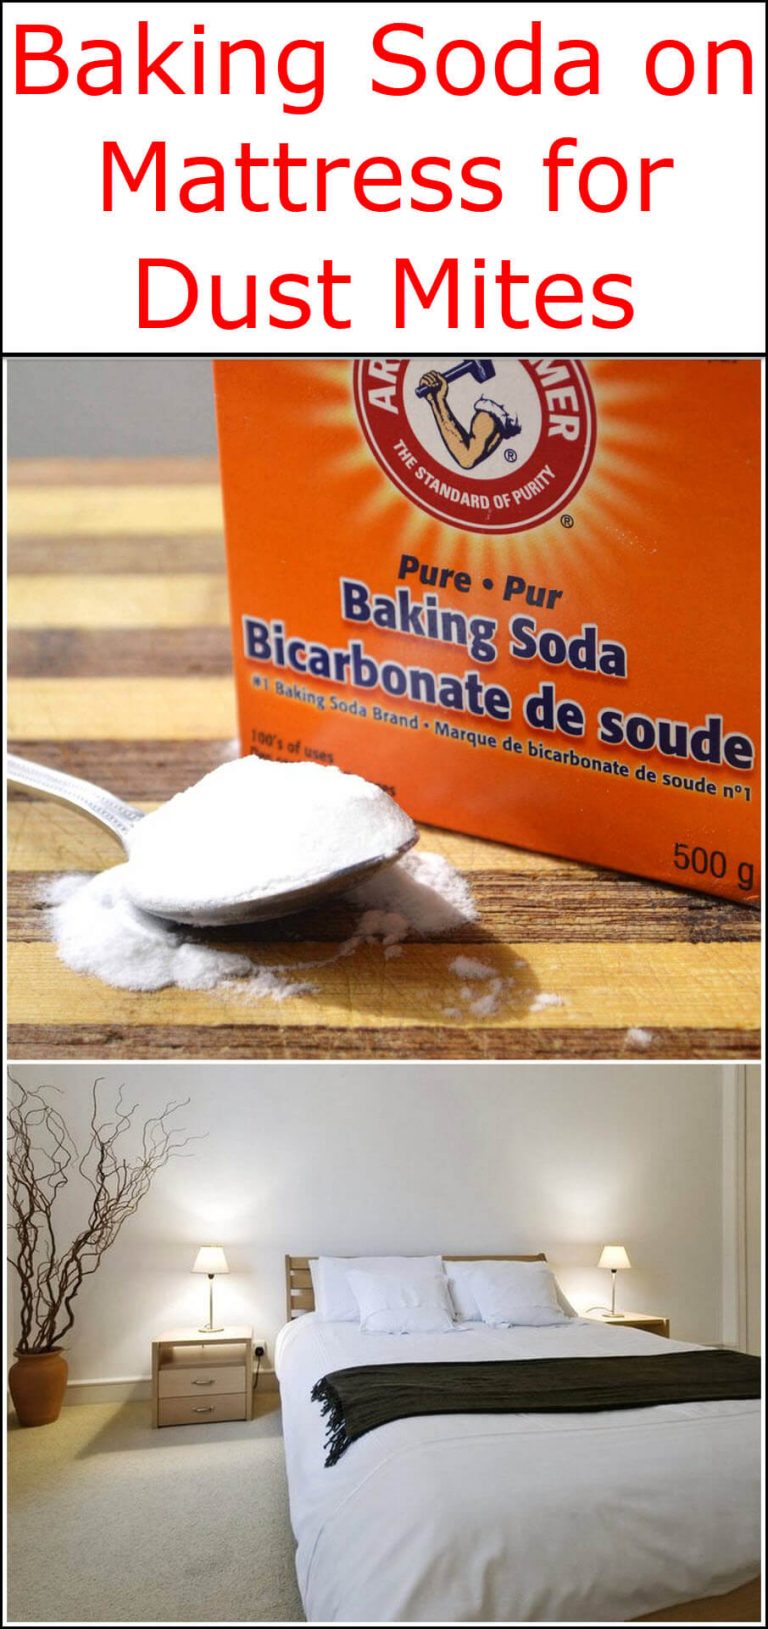 baking soda on mattress for bed bugs